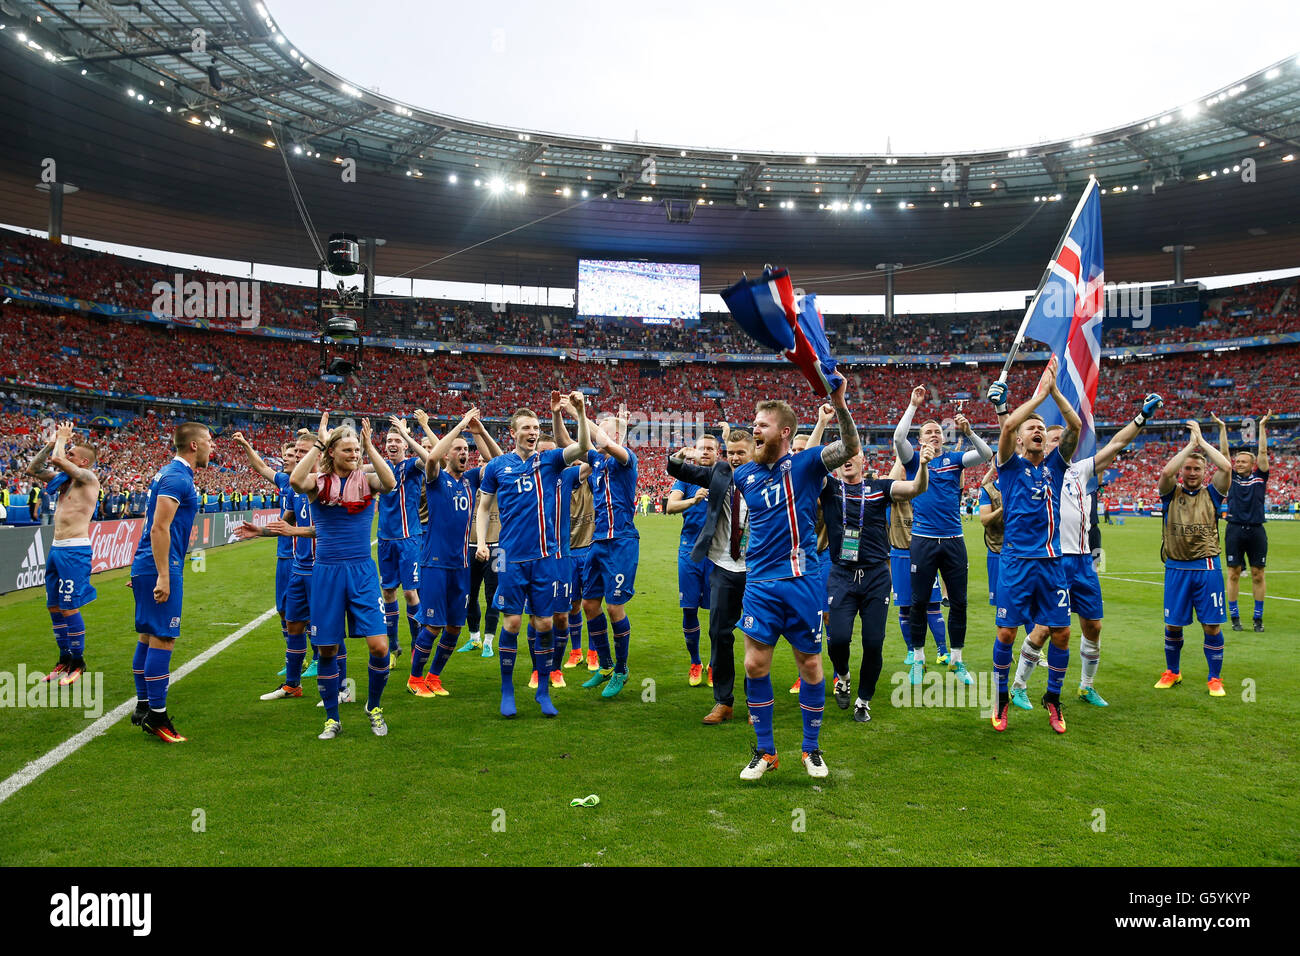 Iceland players celebrate their late winner and qualifying for the last 16 round after the Euro 2016, Group F match at the Stade de France, Paris. PRESS ASSOCIATION Photo. Picture date: Wednesday June 22, 2016. See PA story SOCCER Iceland. Photo credit should read: Owen Humphreys/PA Wire. RESTRICTIONS: Use subject to restrictions. Editorial use only. Book and magazine sales permitted providing not solely devoted to any one team/player/match. No commercial use. Call +44 (0)1158 447447 for further information. Stock Photo